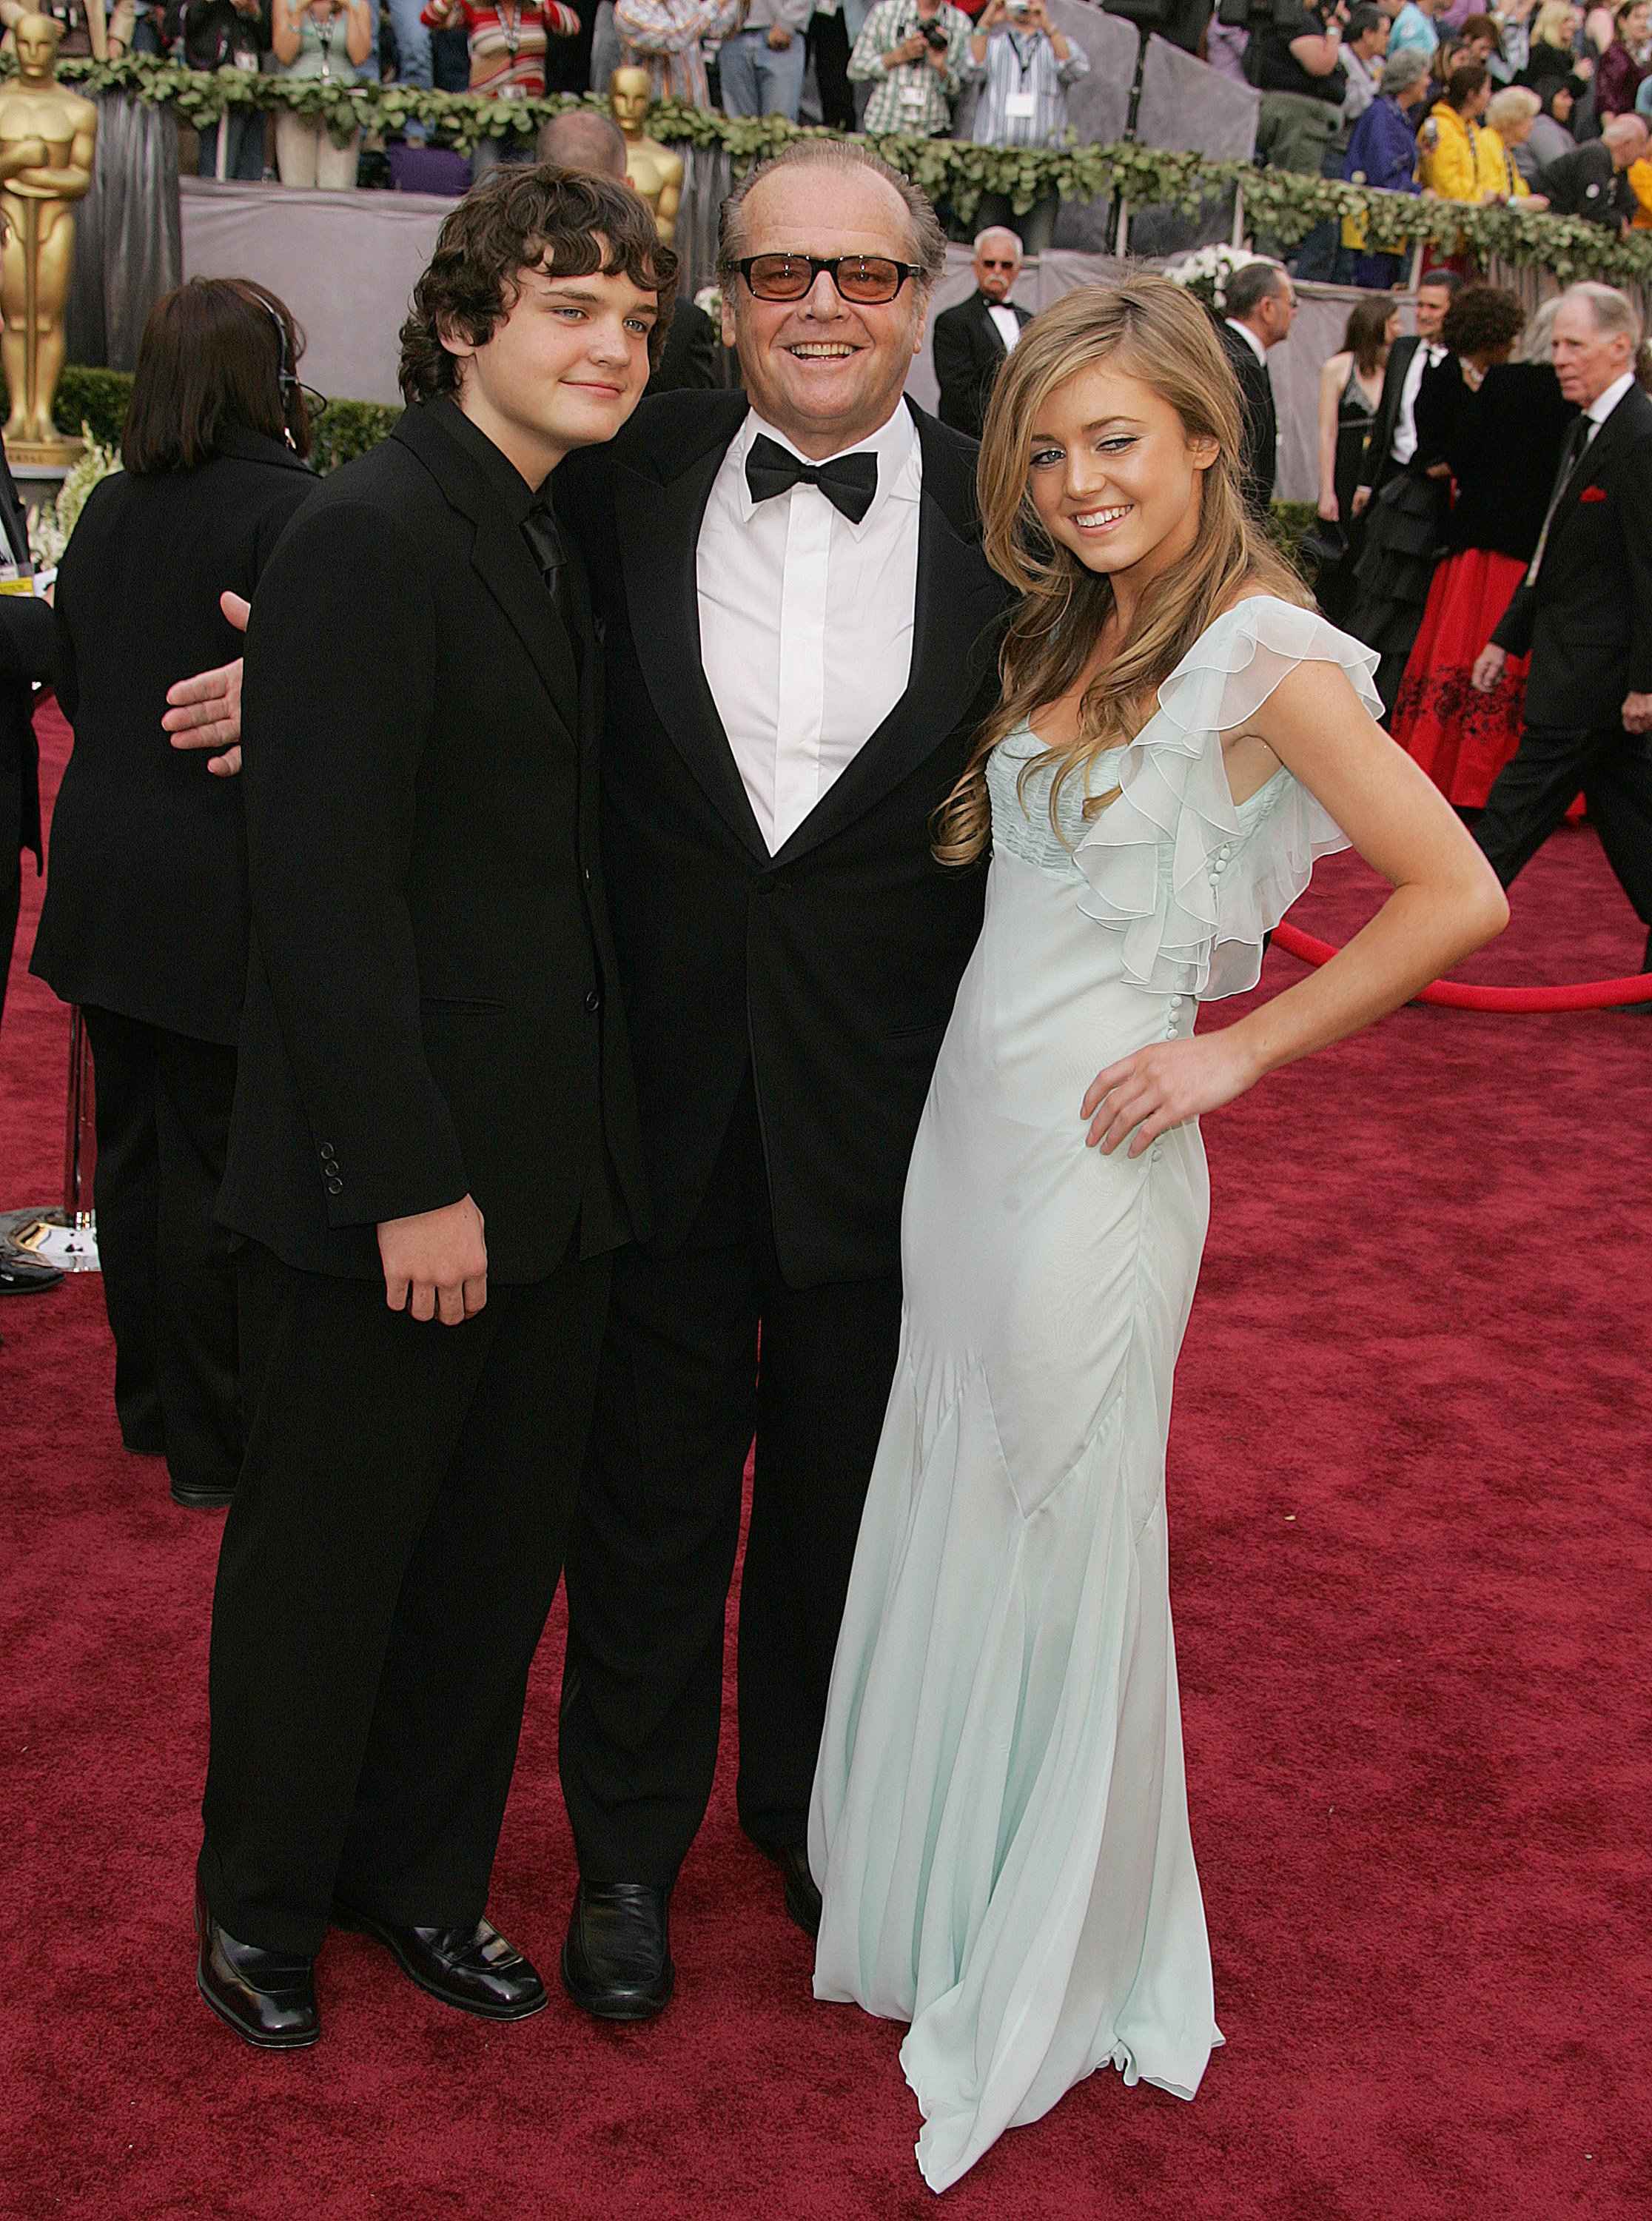 The 78th Annual Academy Awards - Arrivals Jack Nicholson (centre) with Raymond Nicholson and Lorraine Nicholson | Source : Getty Images